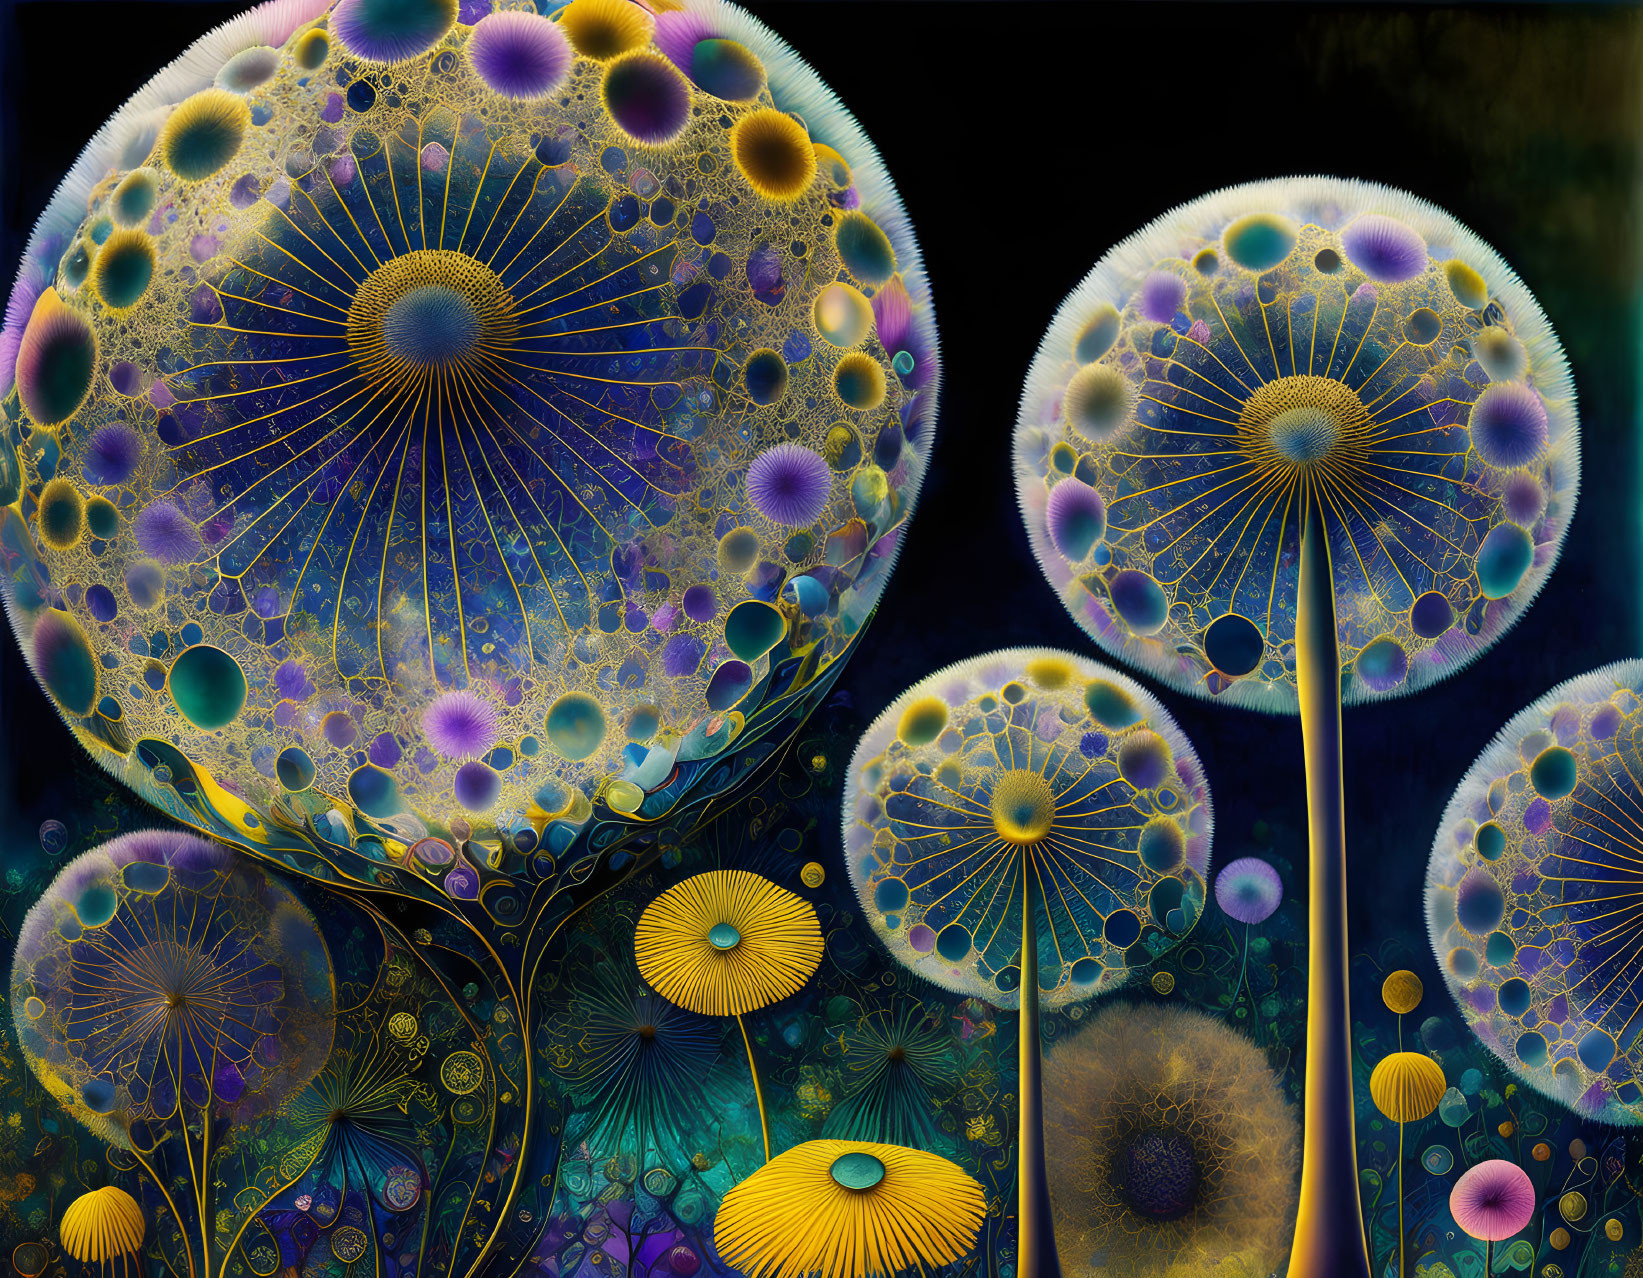 Vividly Colored Abstract Art: Whimsical Dandelion-Like Structures